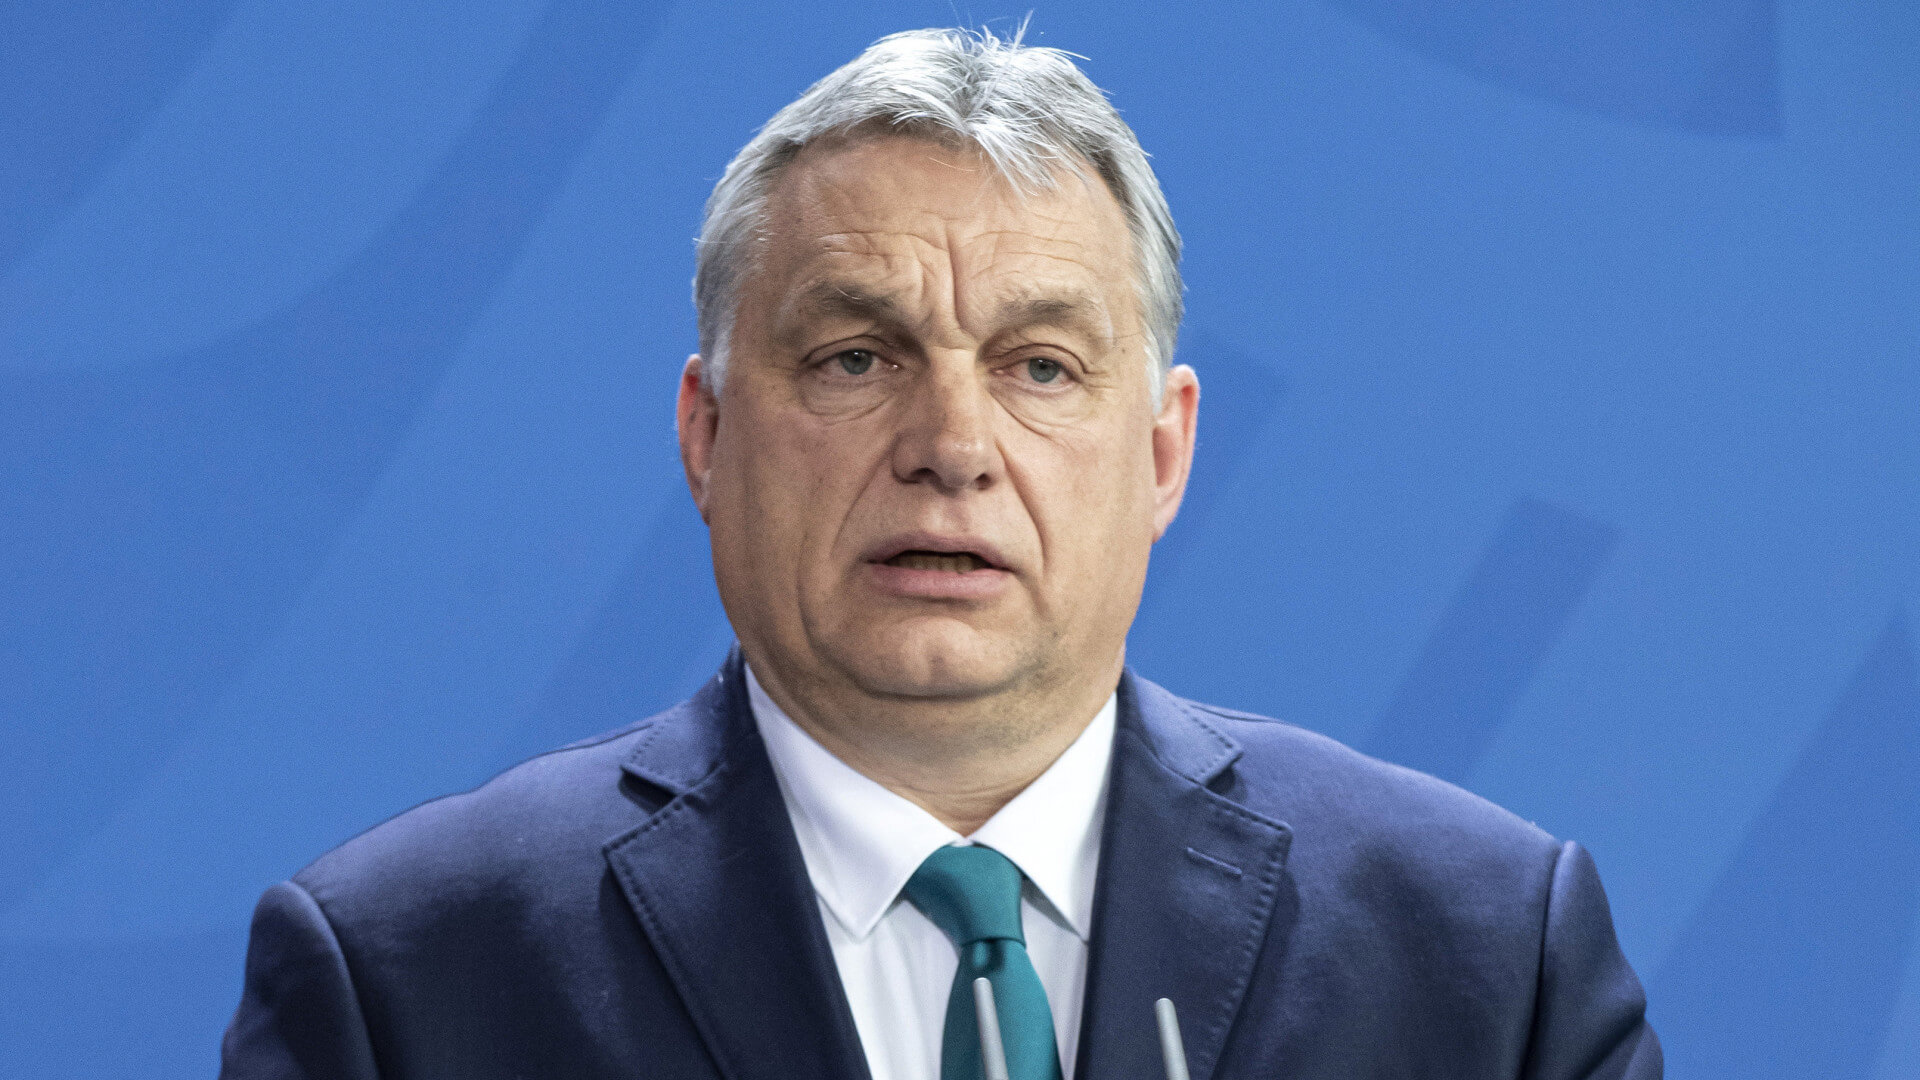 Orbán on Paedophiles in Hungary: “They Must Be Cut into Pieces”